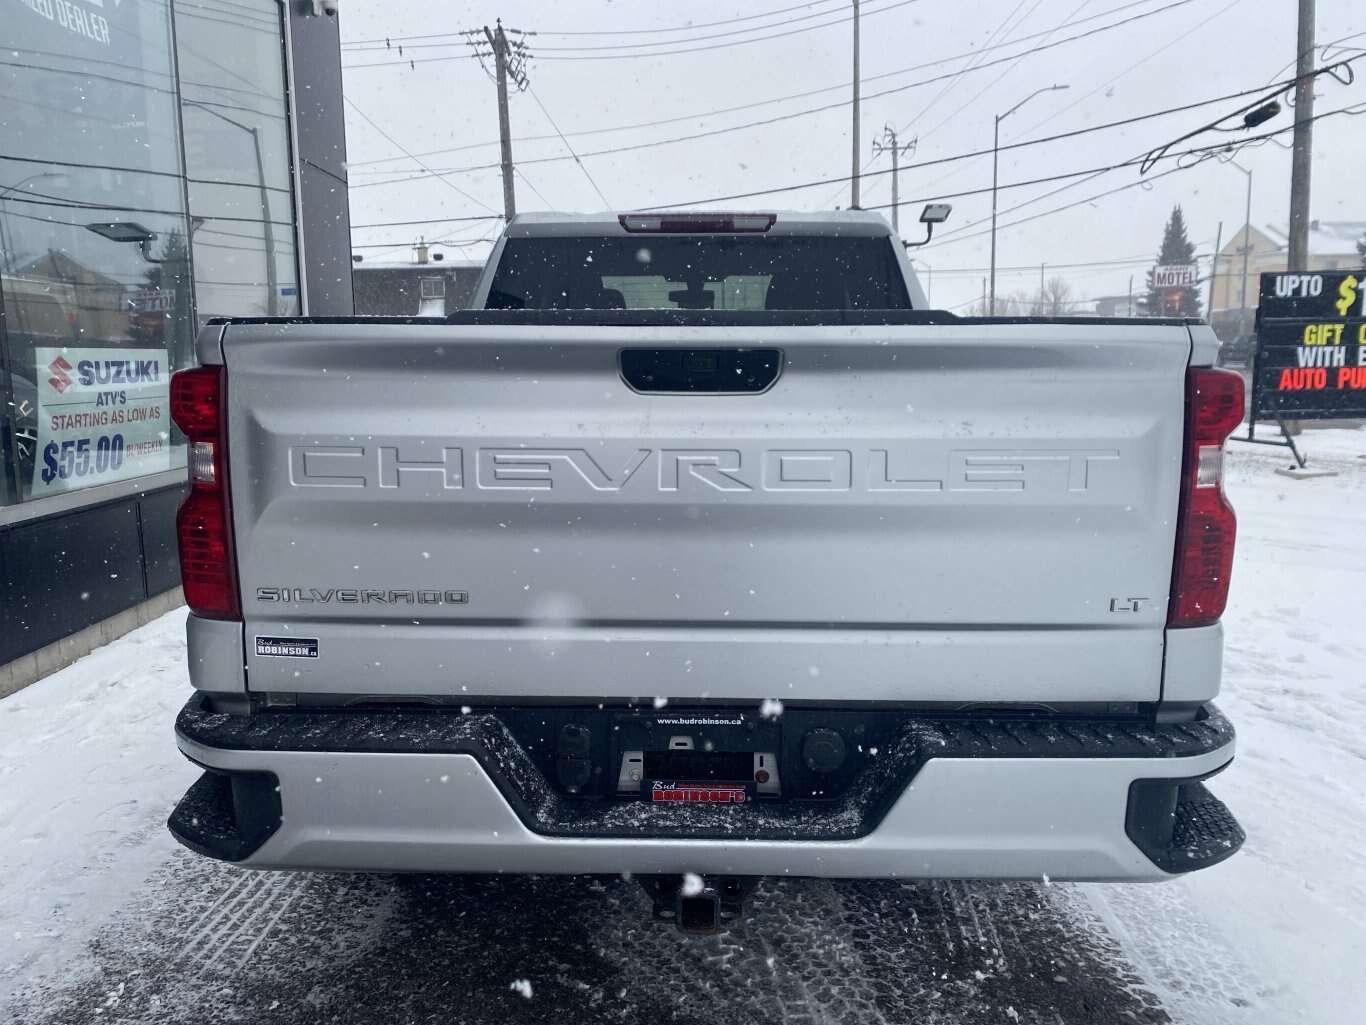 2020 CHEVROLET SILVERADO 1500 LT DOUBLE CAB WITH REAR VIEW CAMERA, ONSTAR SERVICES & HEATED SEATS!!